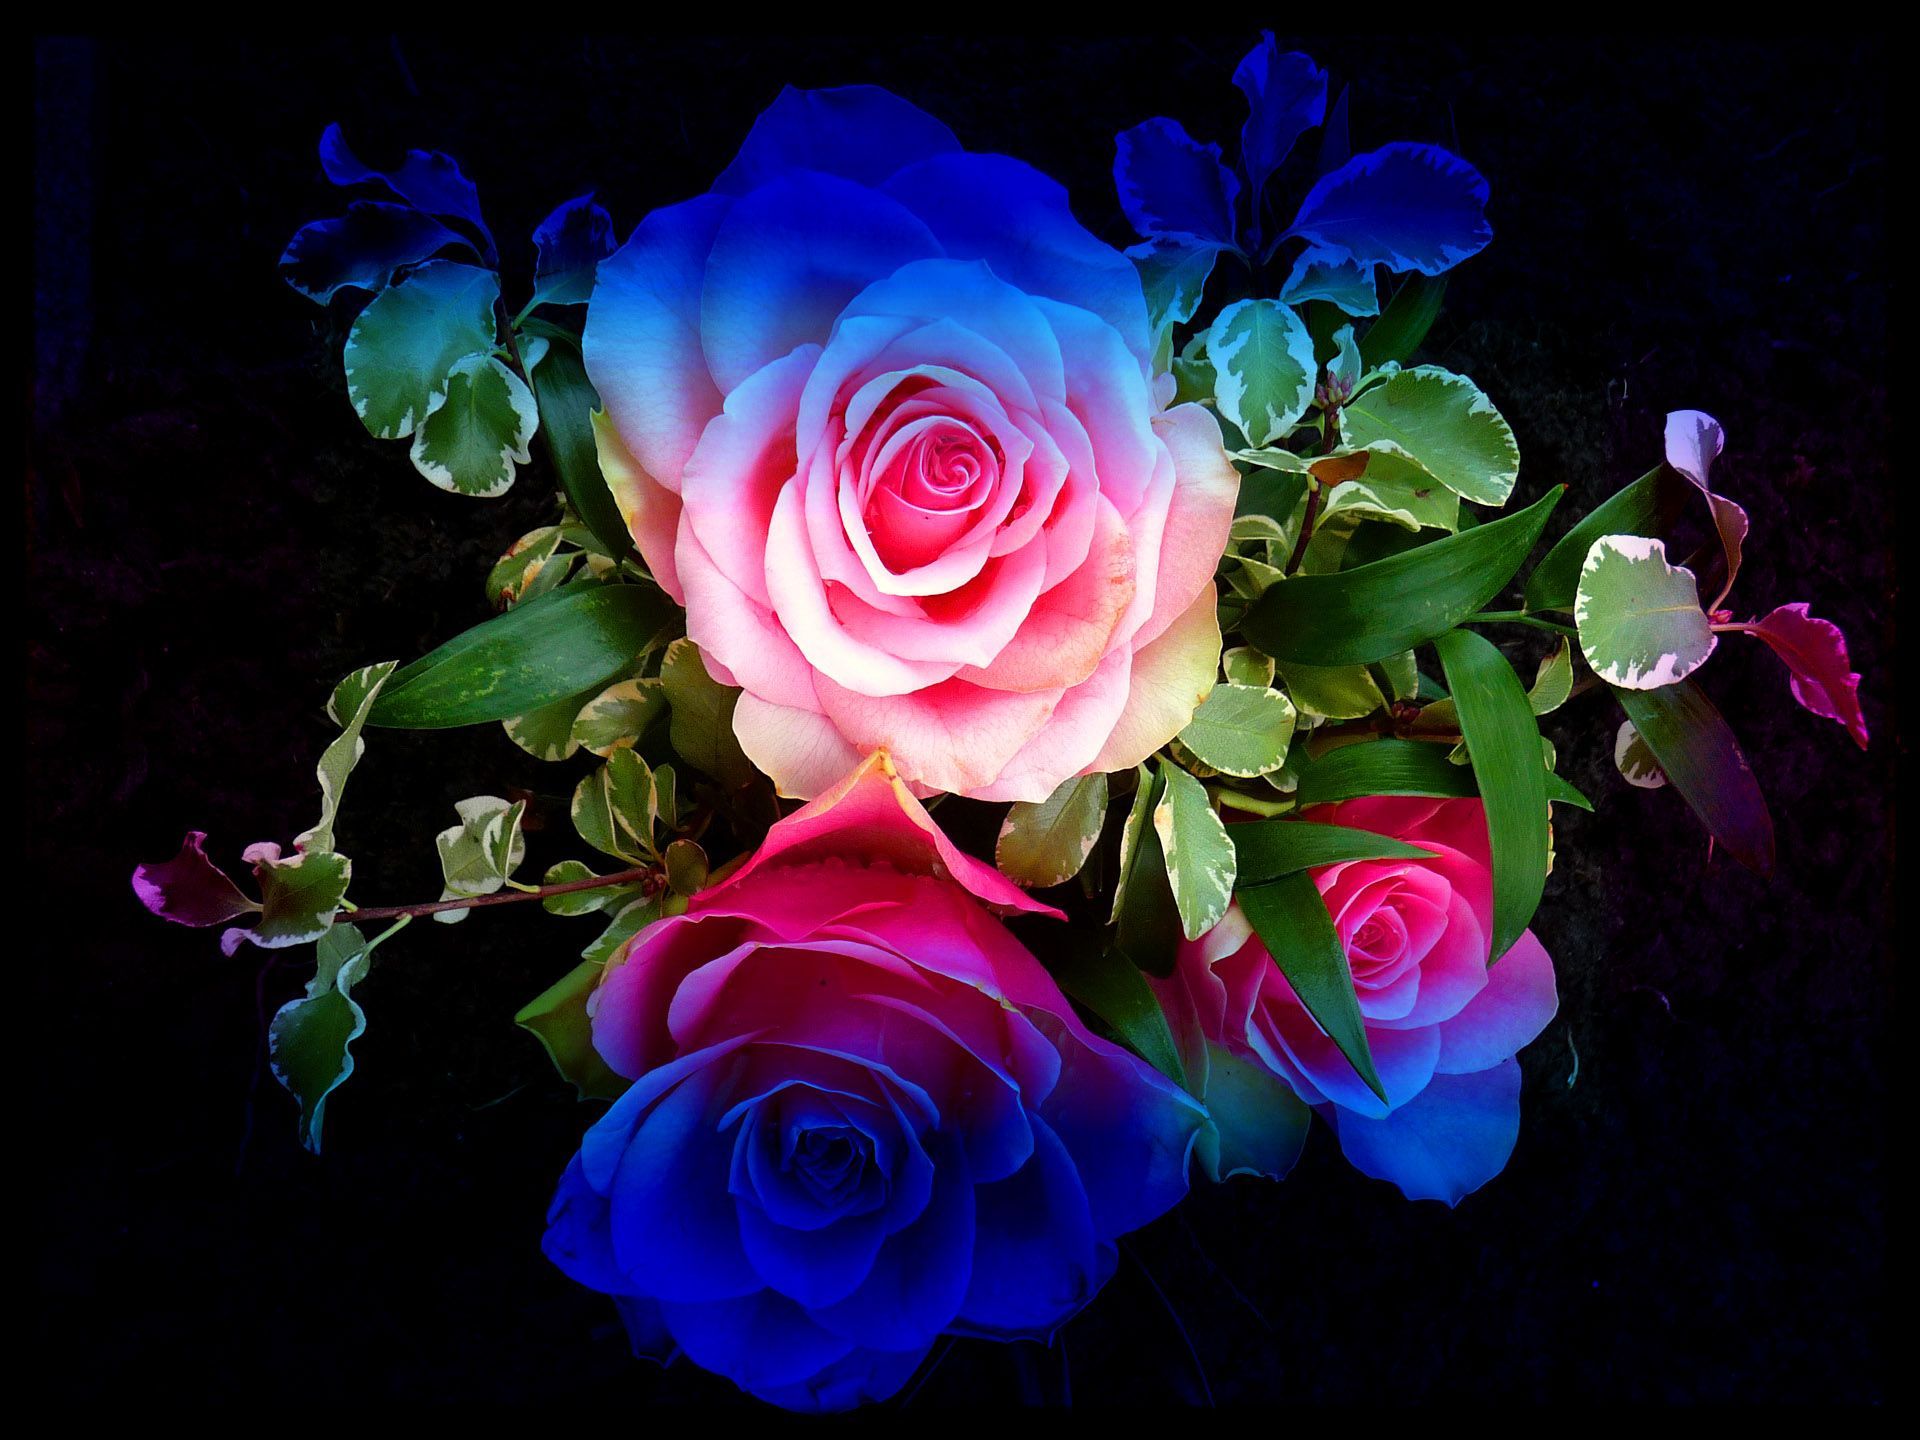 Blue And Pink Rose Wallpapers 4k Hd Blue And Pink Rose Backgrounds